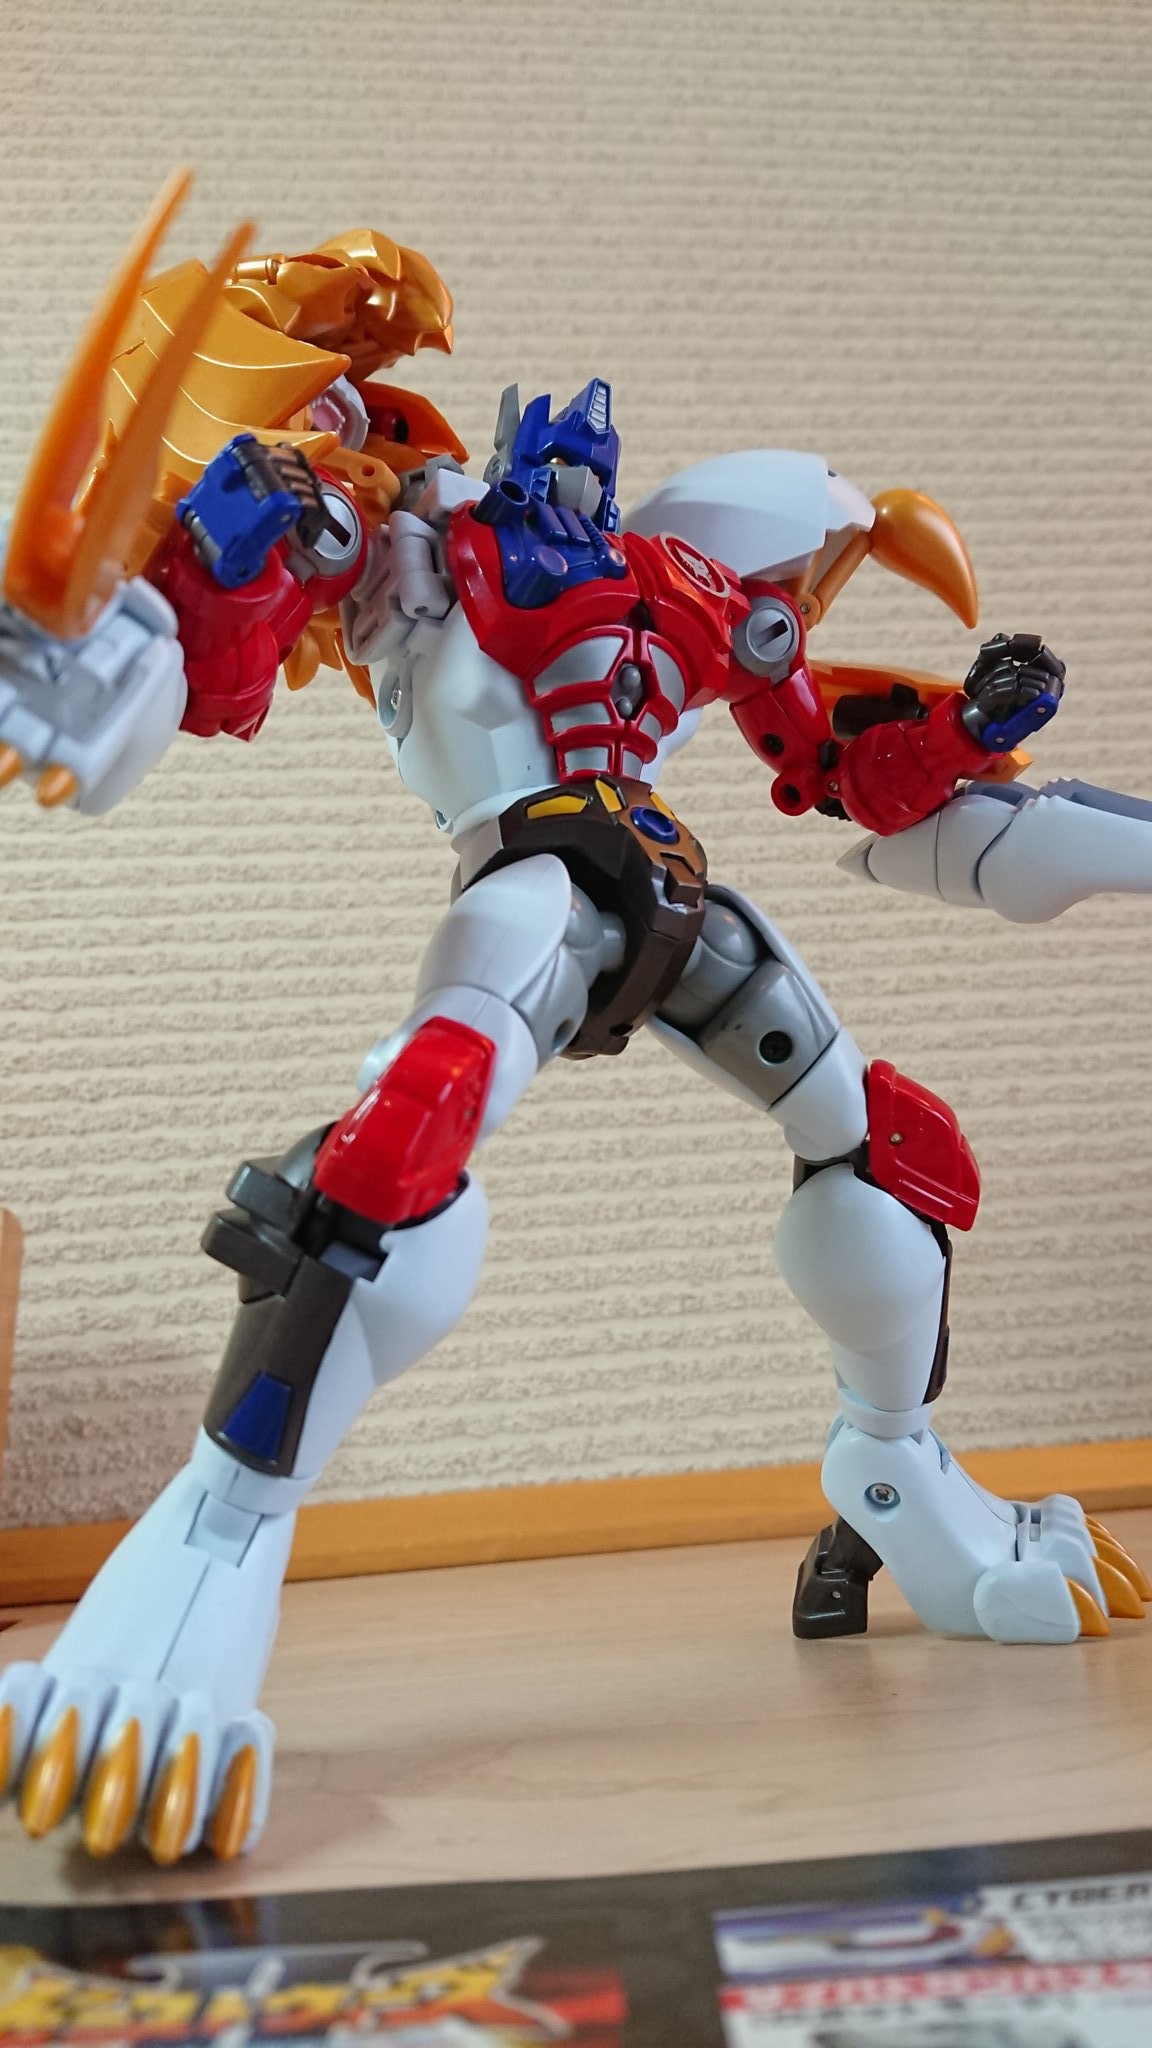 Transformers News: More In-Hand Images of MP 48 Lio Convoy